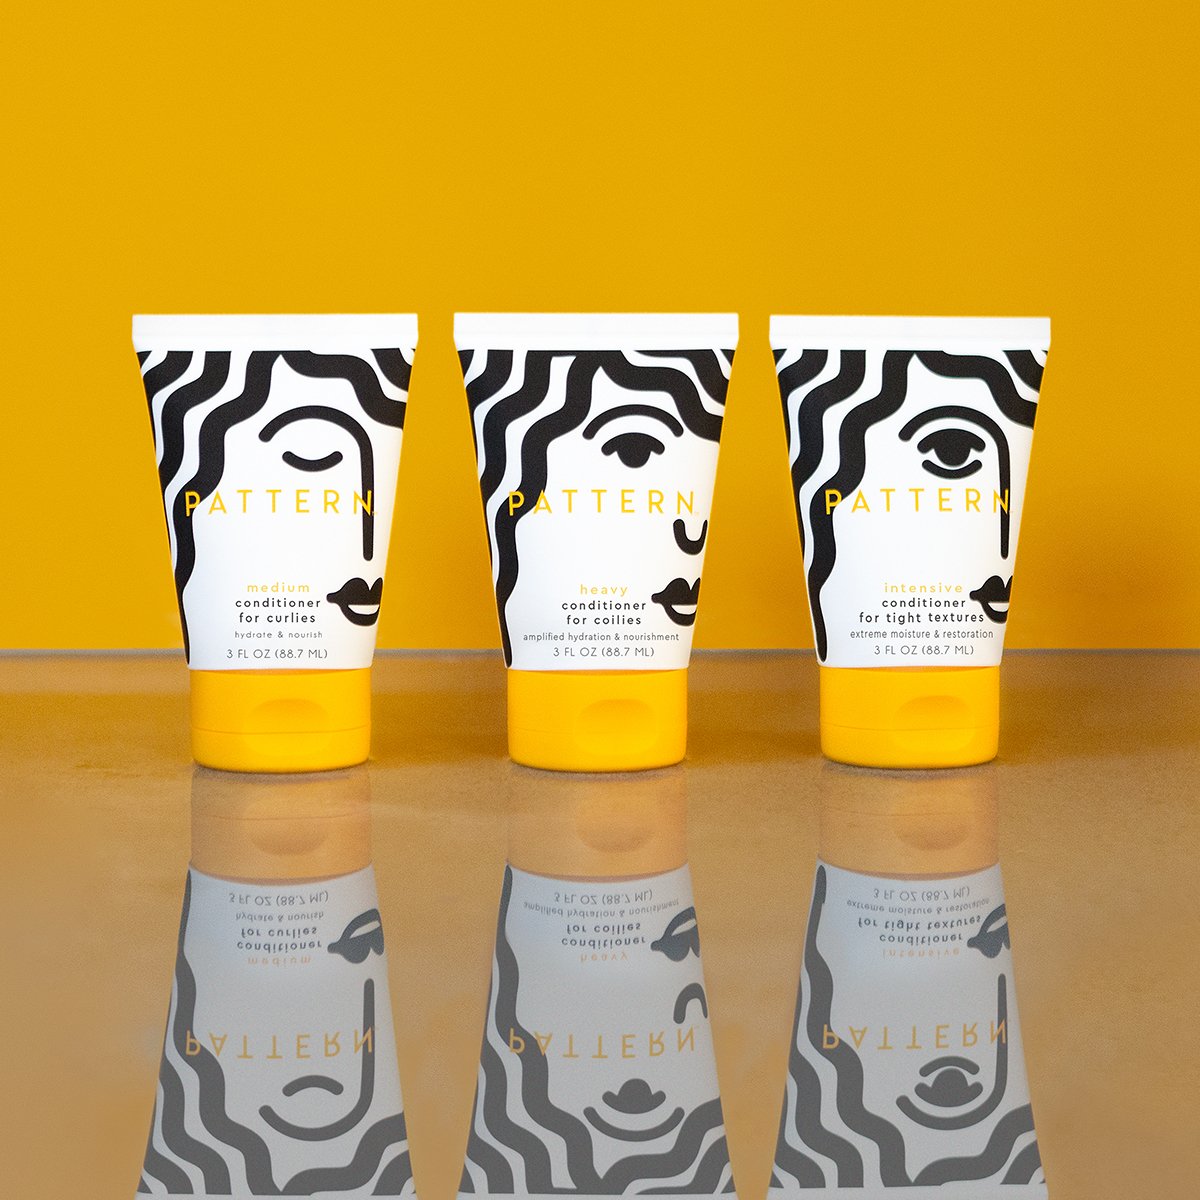 3 bottles of Pattern hair products on a yellow background